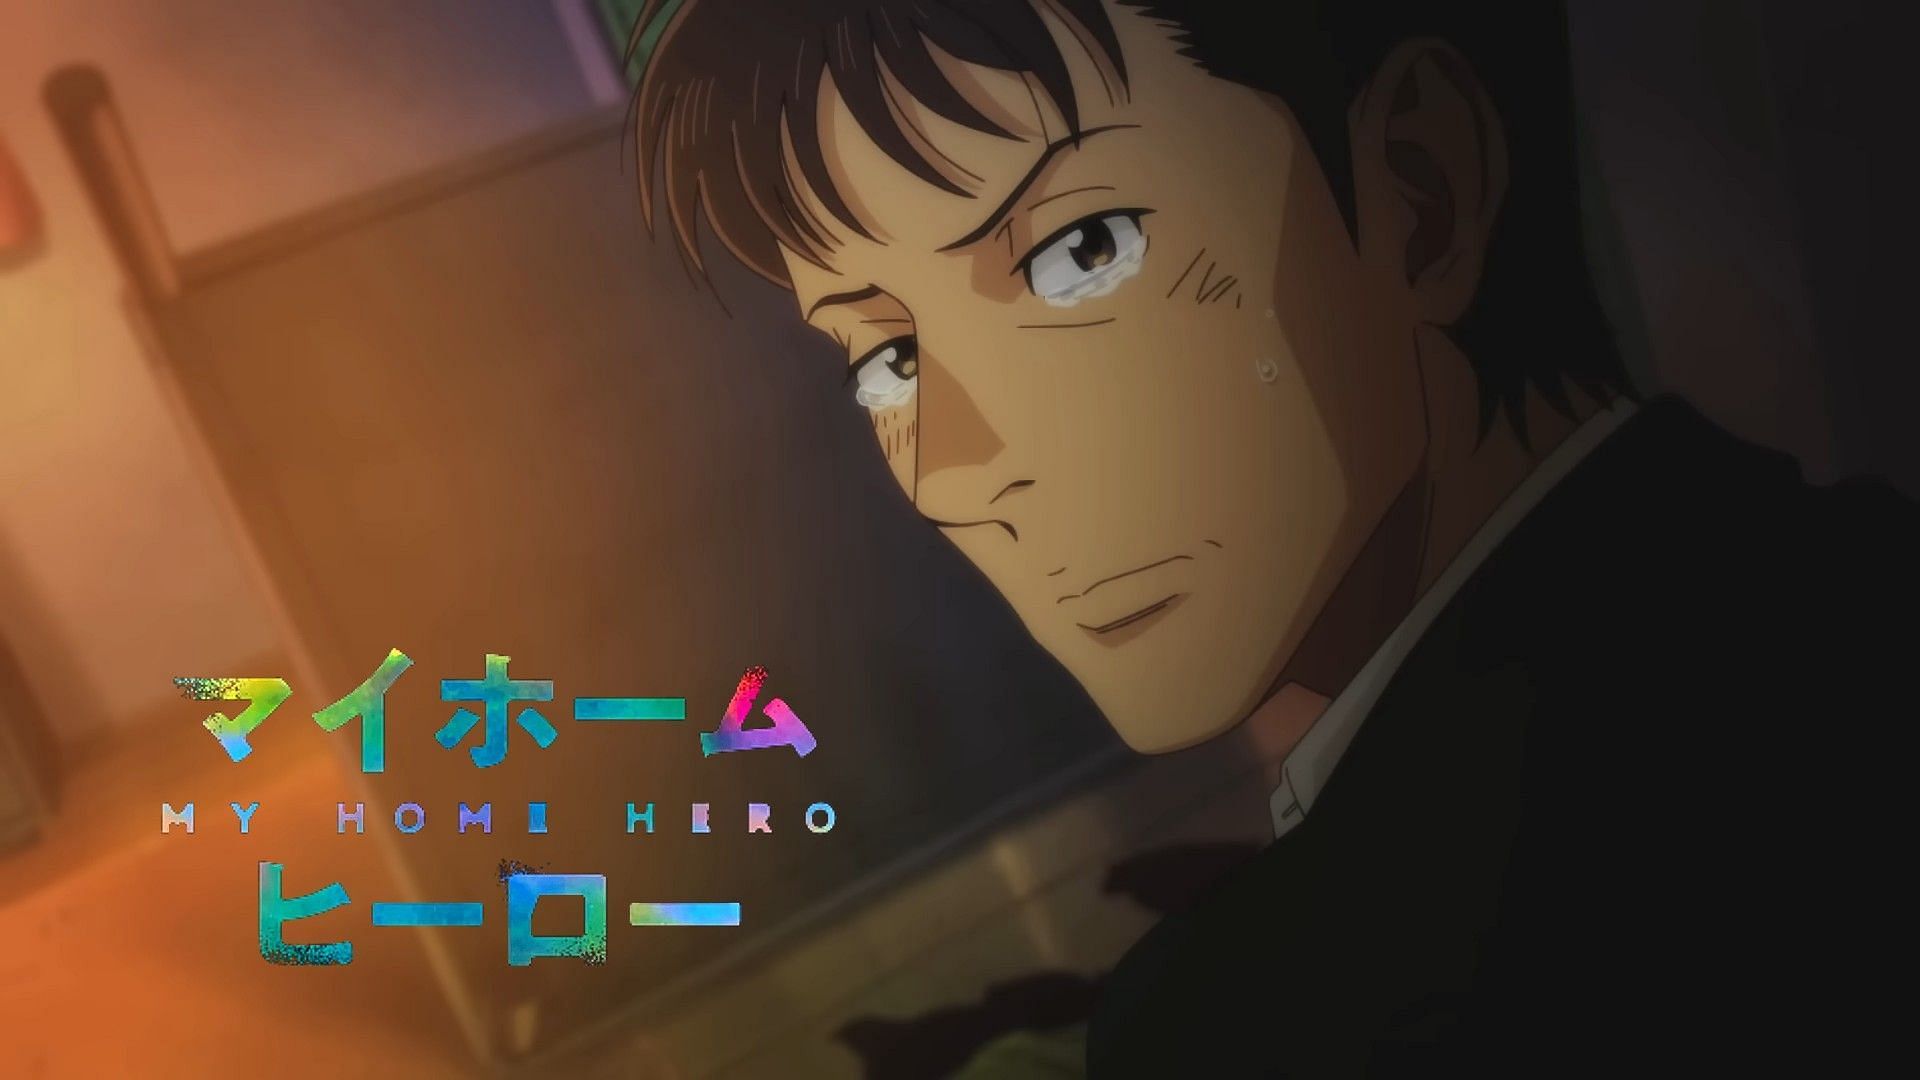 My Home Hero: A Proper Thriller in the Making - Anime Corner